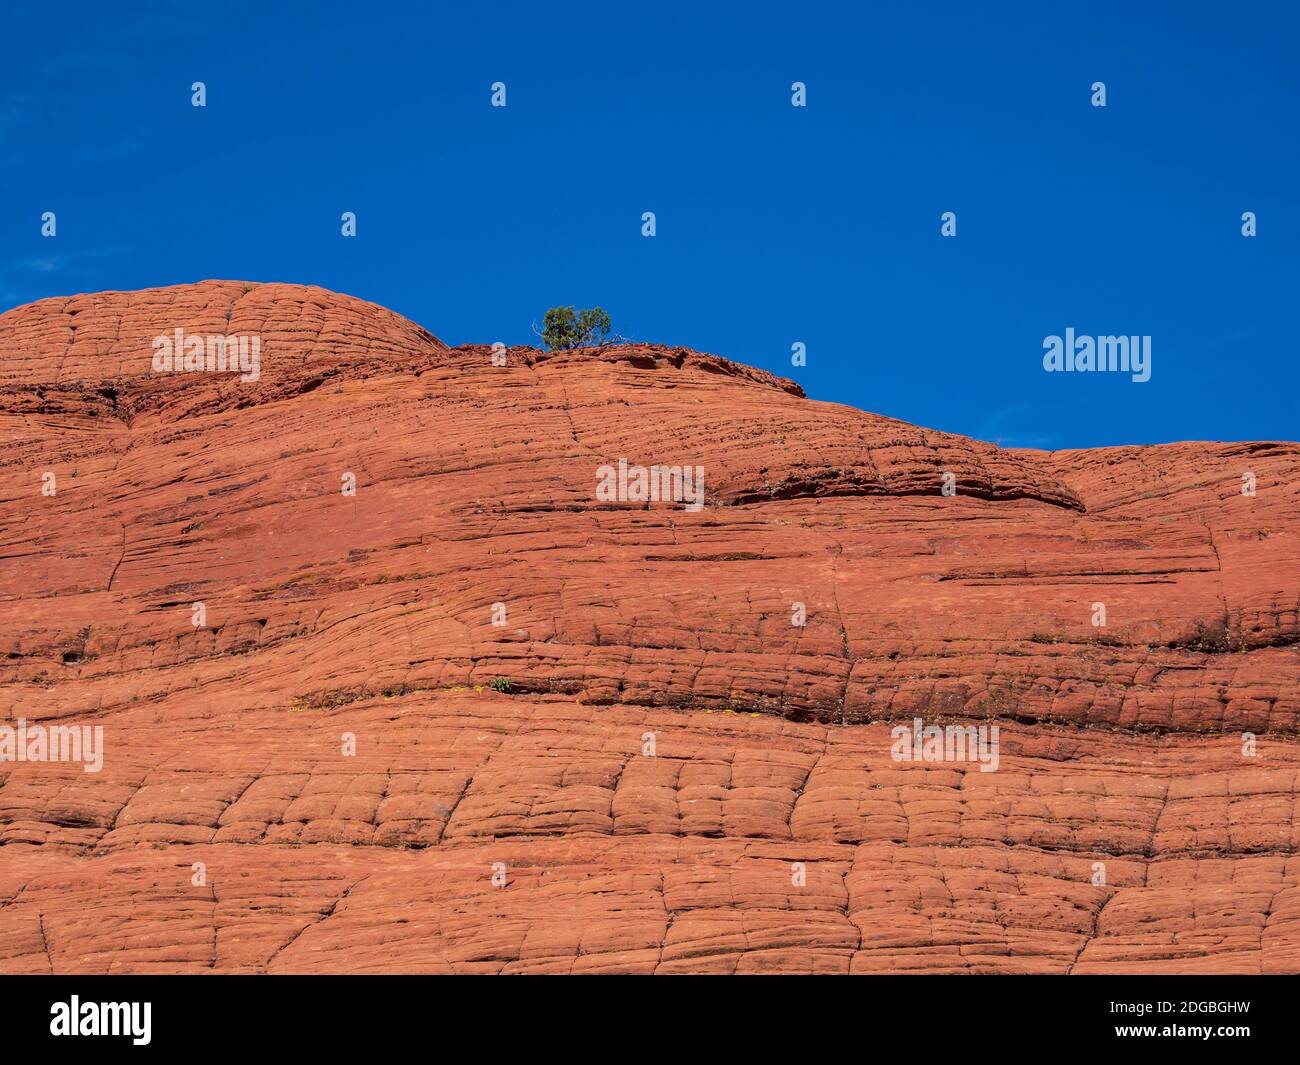 https://c8.alamy.com/comp/2DGBGHW/red-navajo-sandstone-in-the-petrified-dunes-snow-canyon-state-park-saint-george-utah-2DGBGHW.jpg